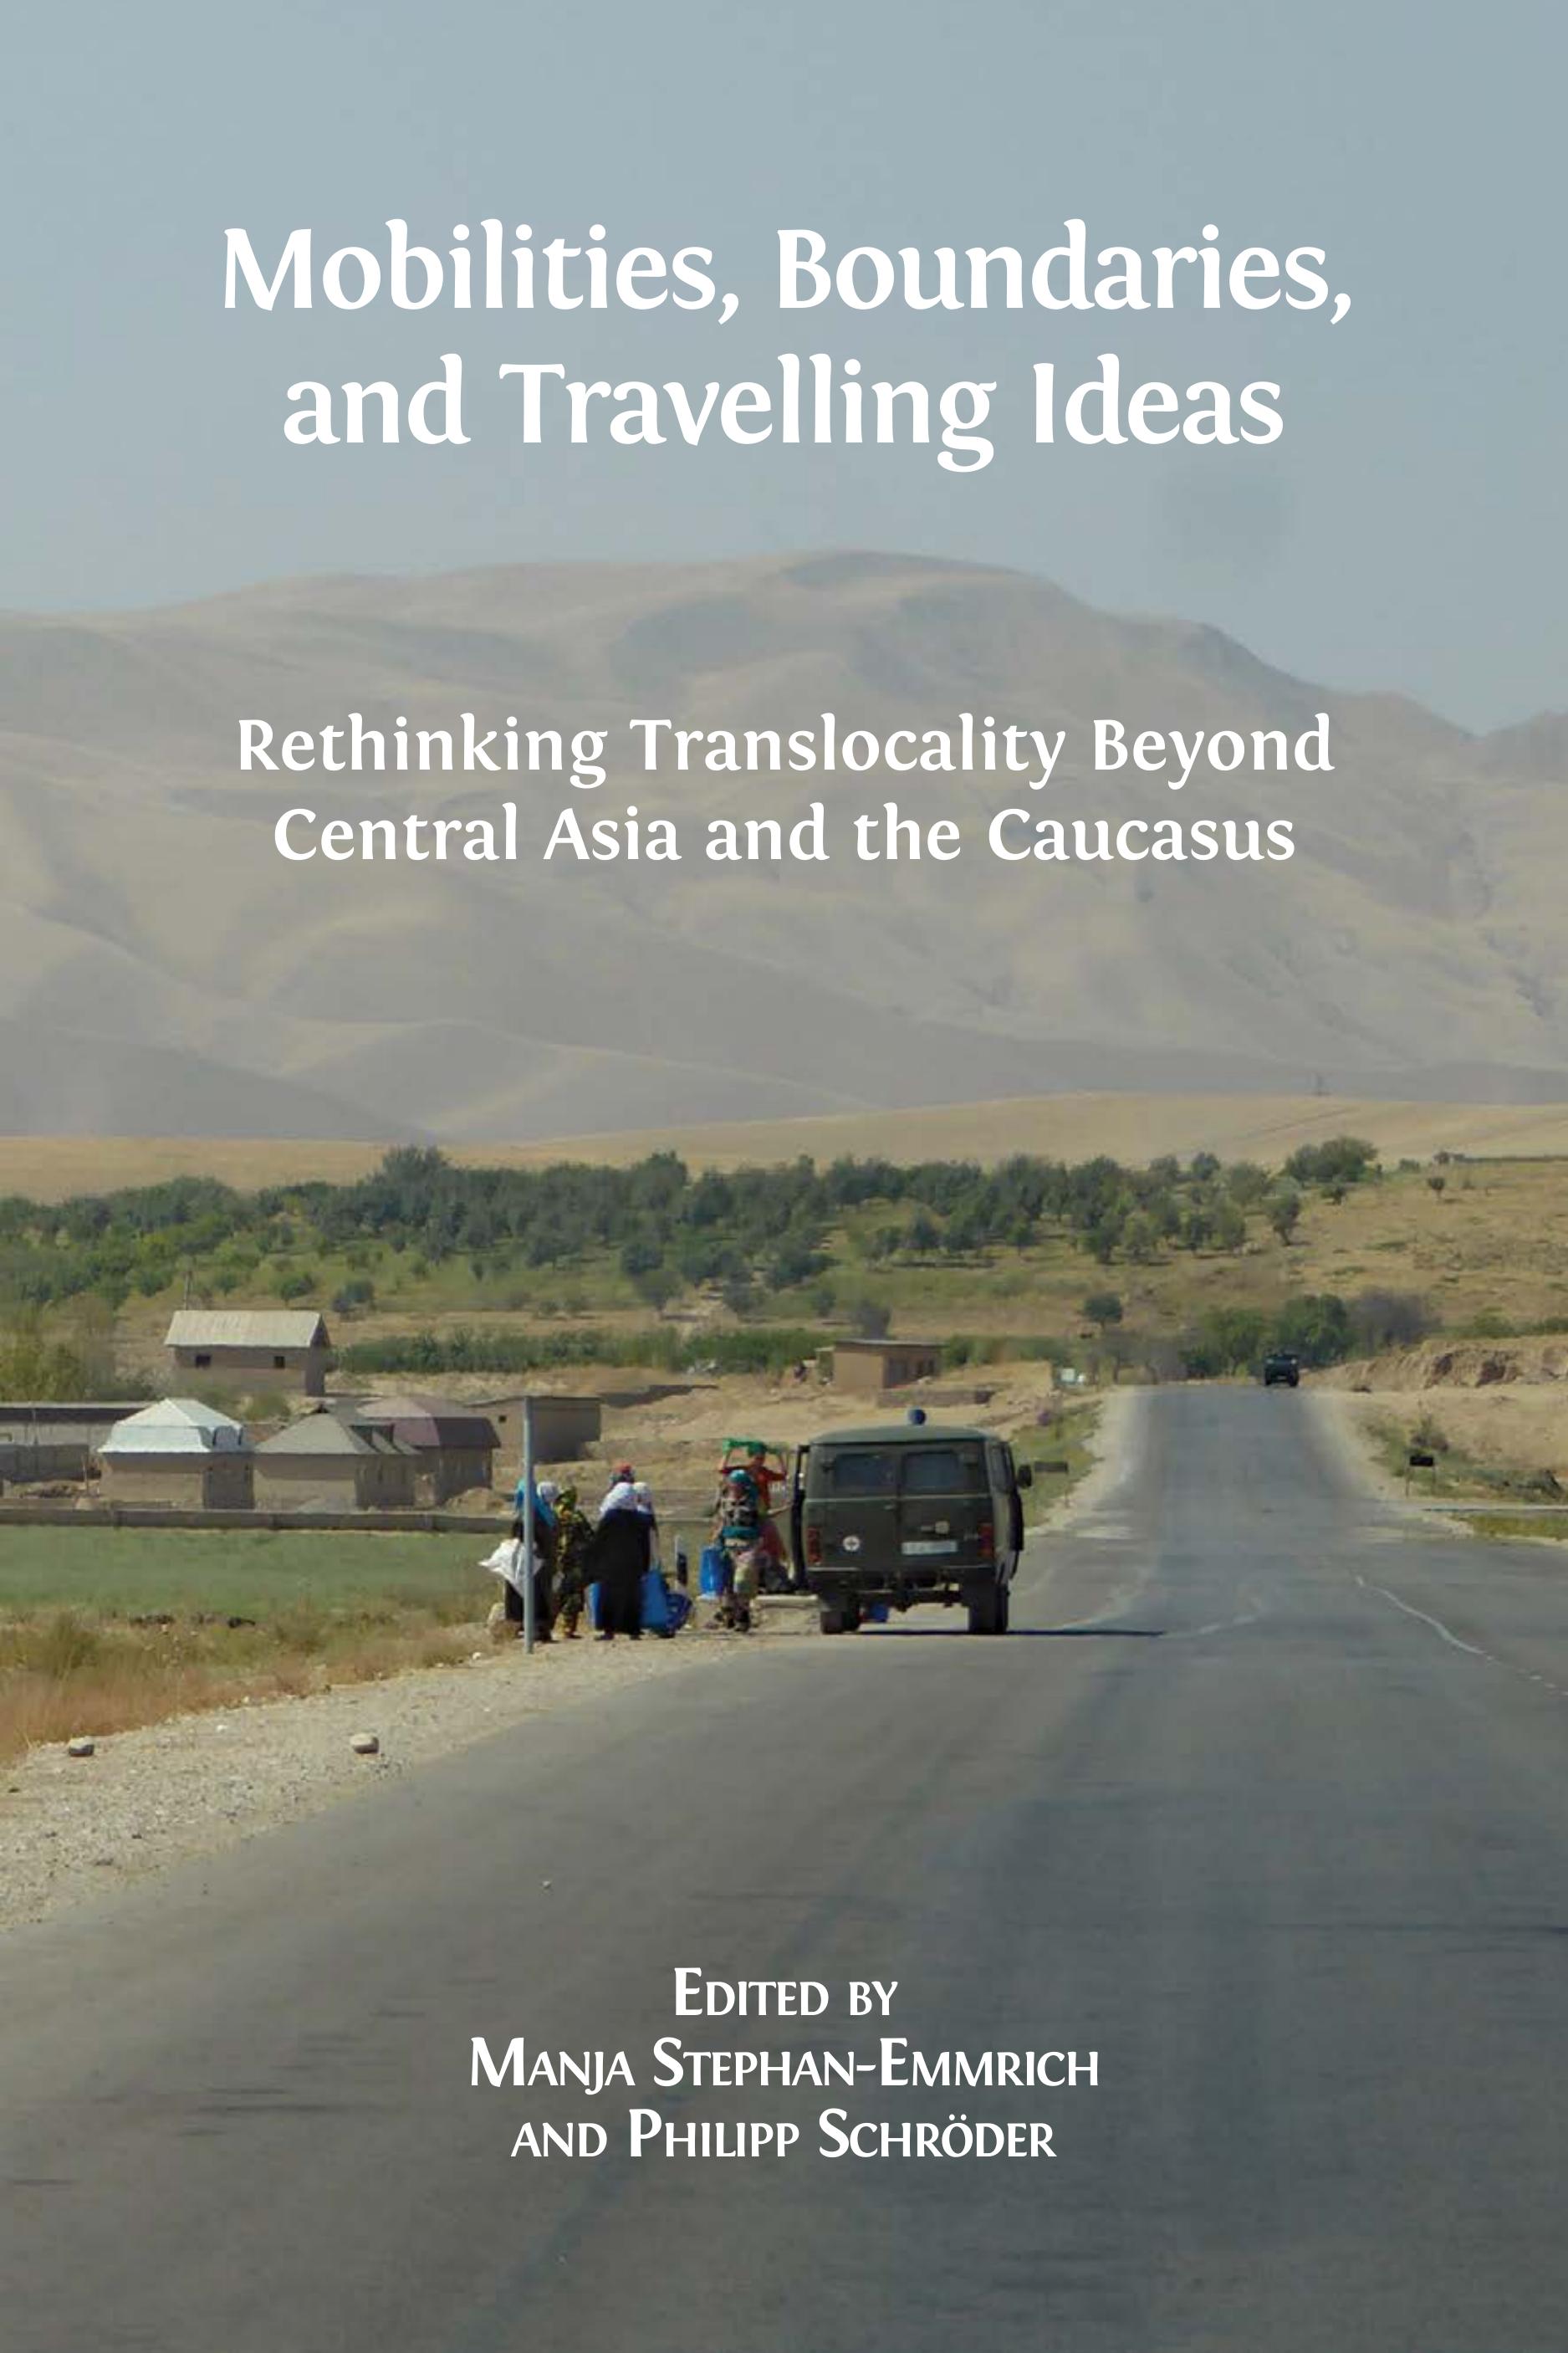 Mobilities, Boundaries, and Travelling Ideas: Rethinking Translocality Beyond Central Asia and the Caucasus